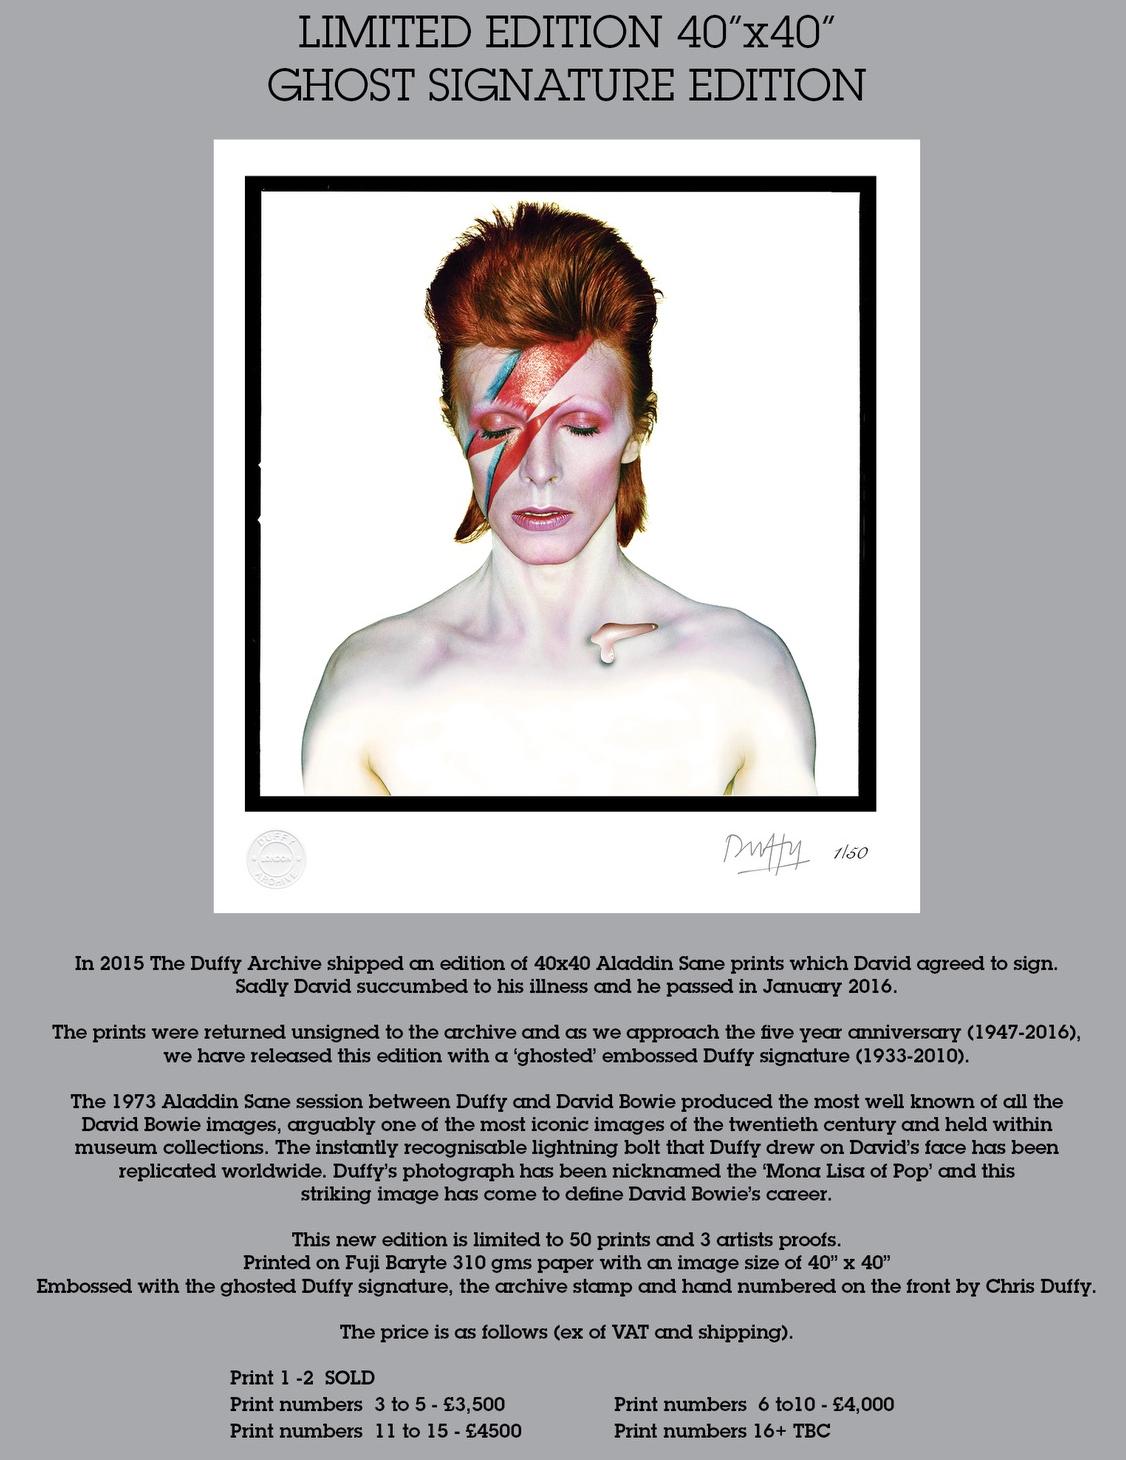 David Bowie Aladdin Sane Duffy New Release Ghost Signature Edition Oversize  - Photograph by Brian Duffy